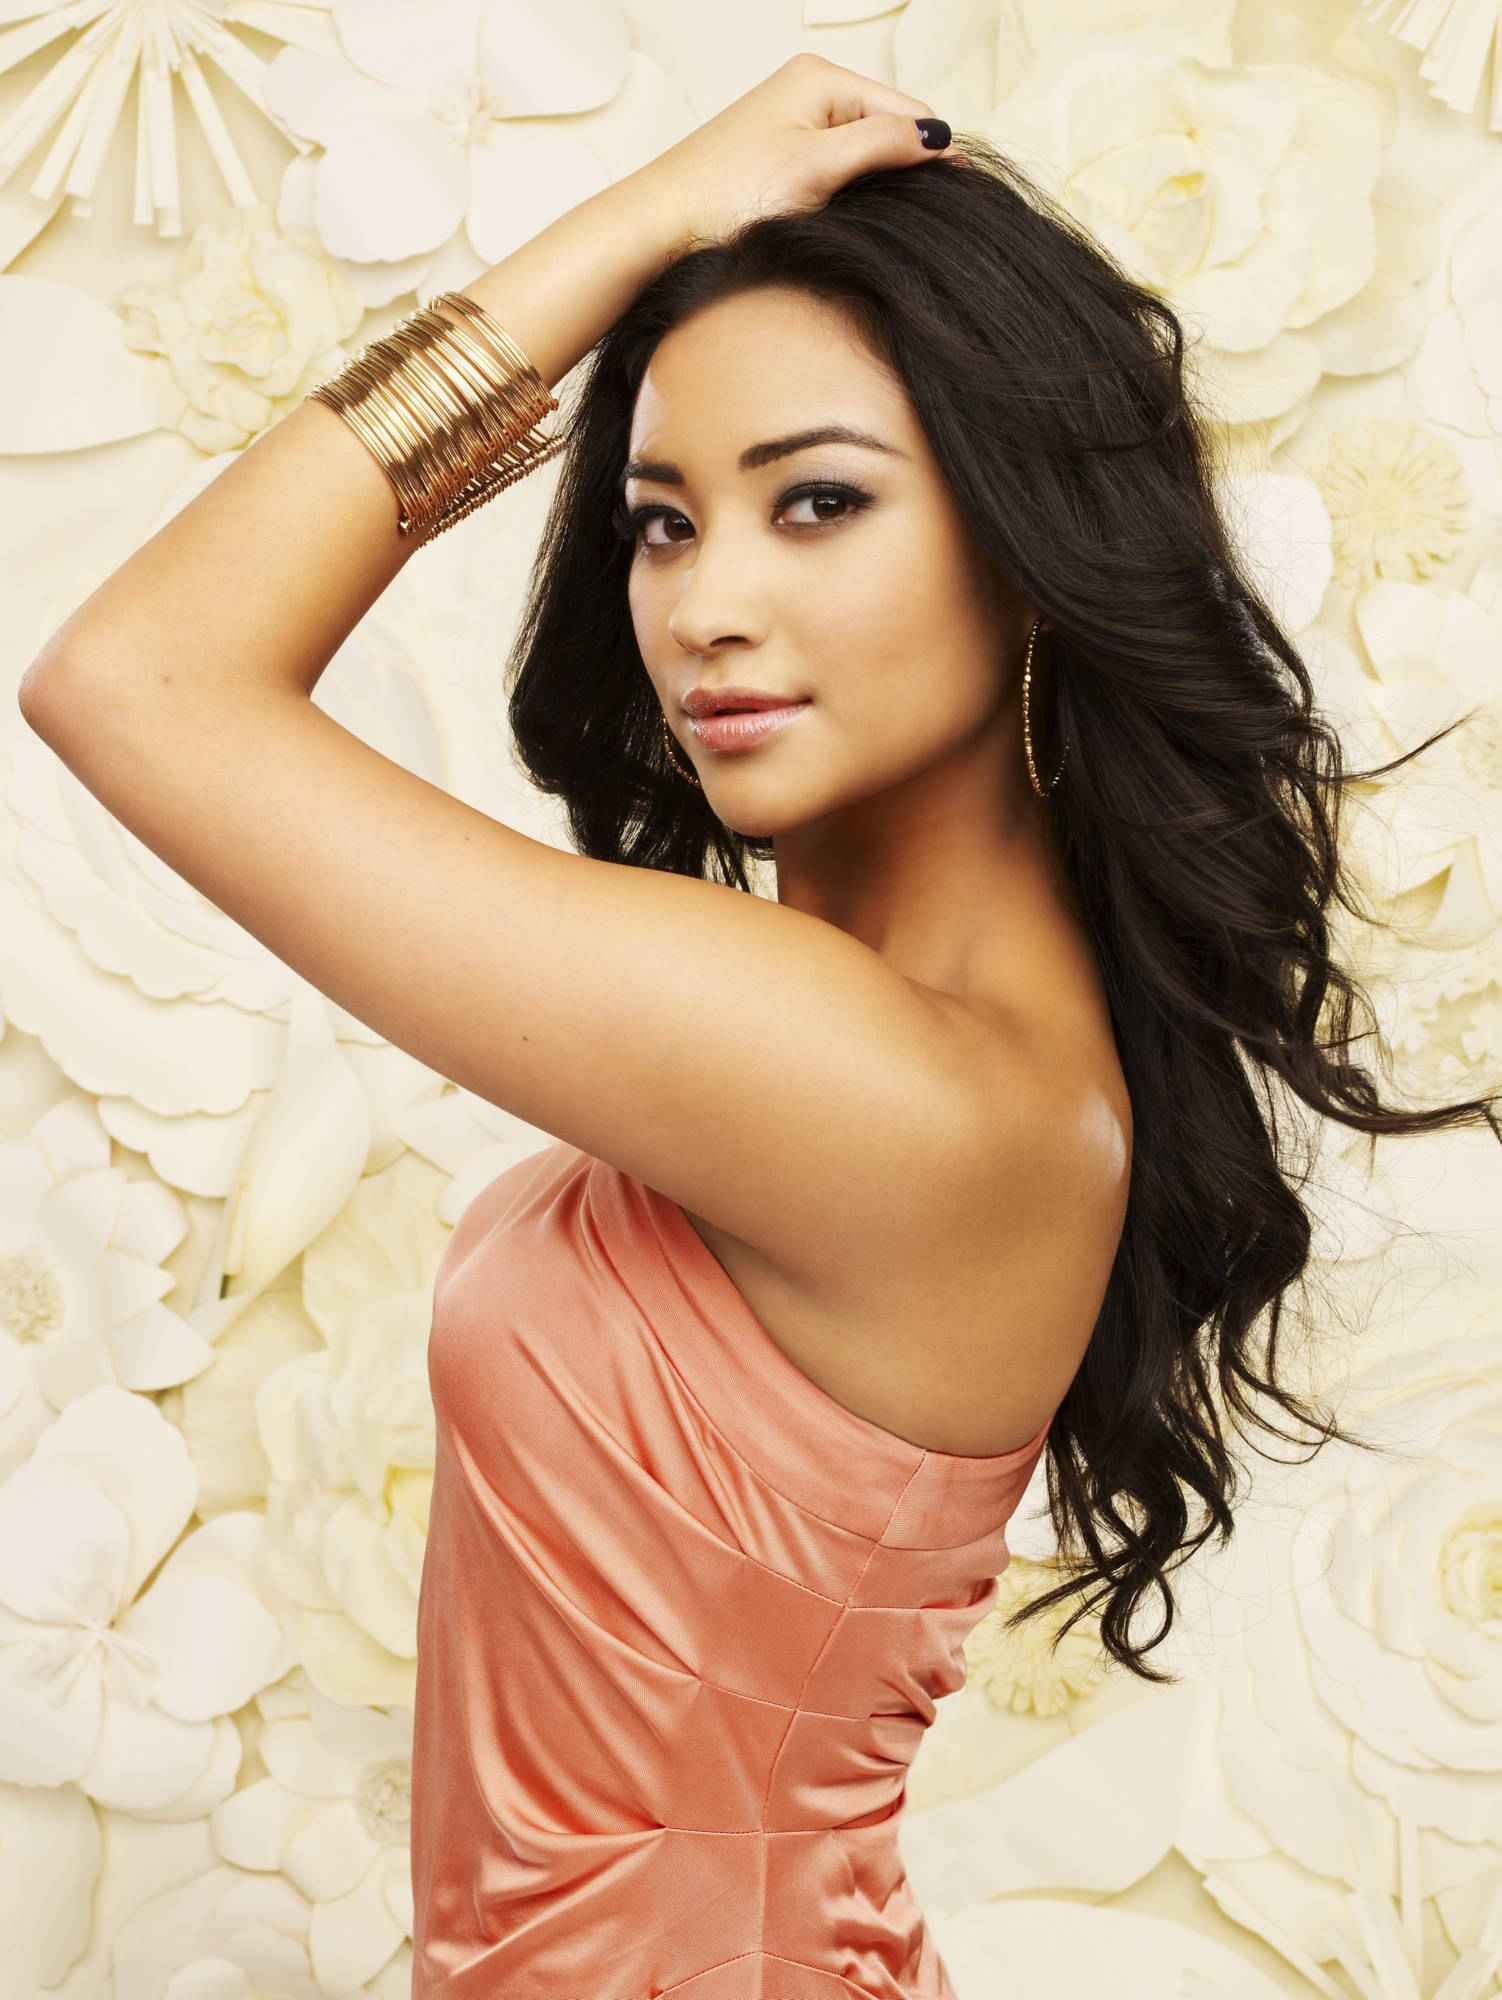 http://images4.wikia.nocookie.net/__cb20101219215832/prettylittleliars/images/7/79/EF009.jpg